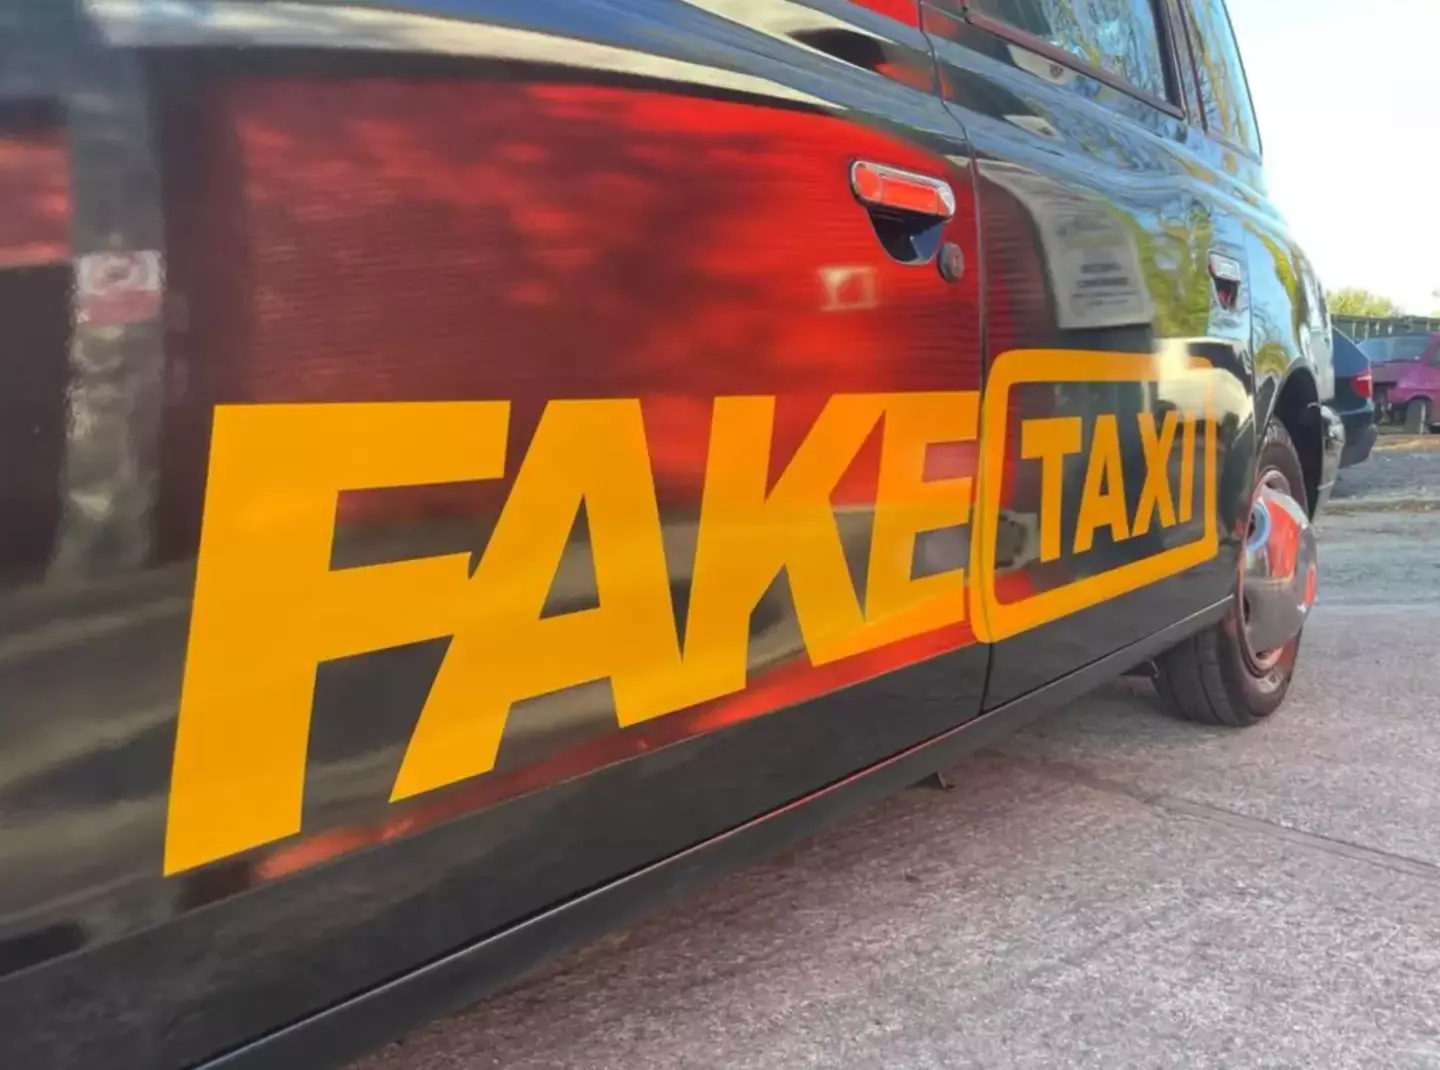 The Fake Taxi was being sold on Facebook.